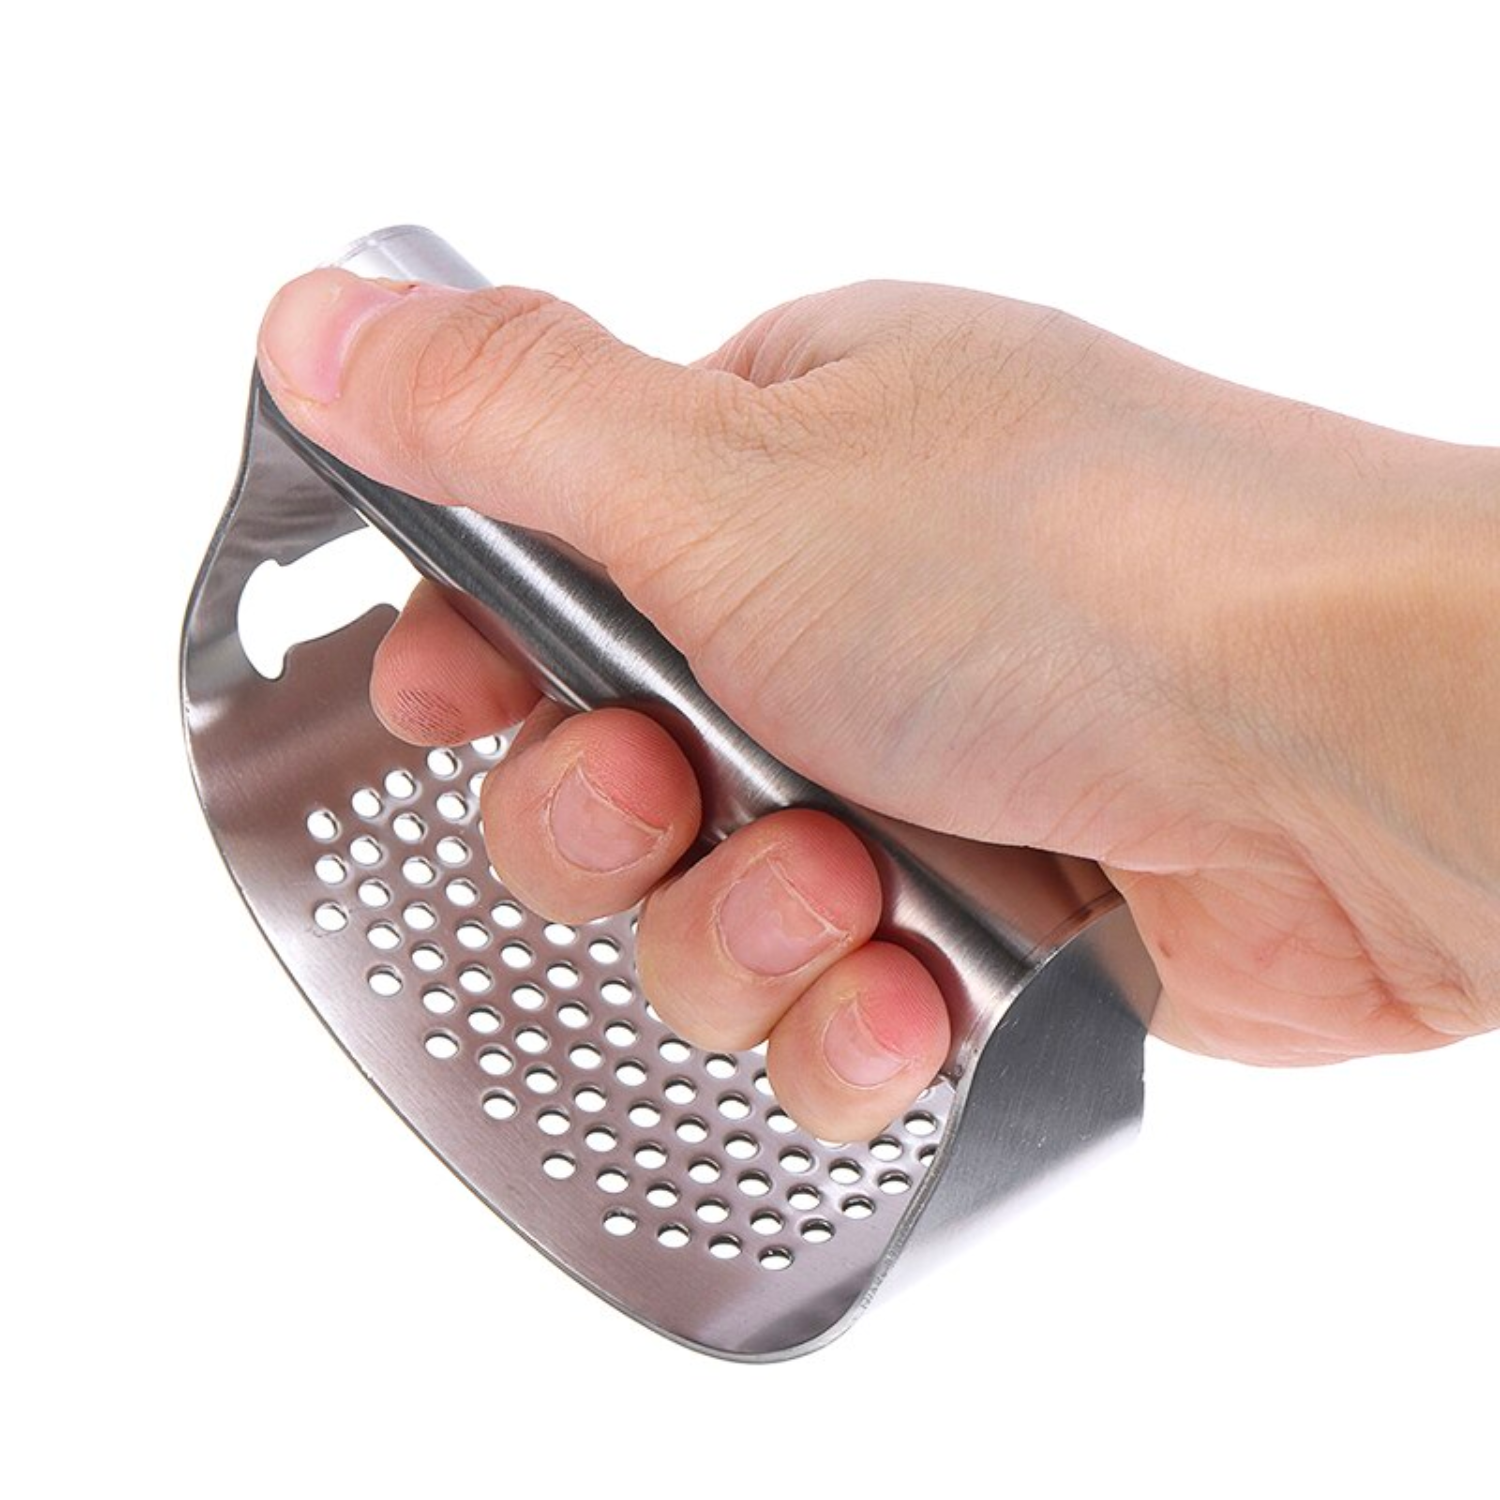 garlic crusher stainless steel with a bottle opener